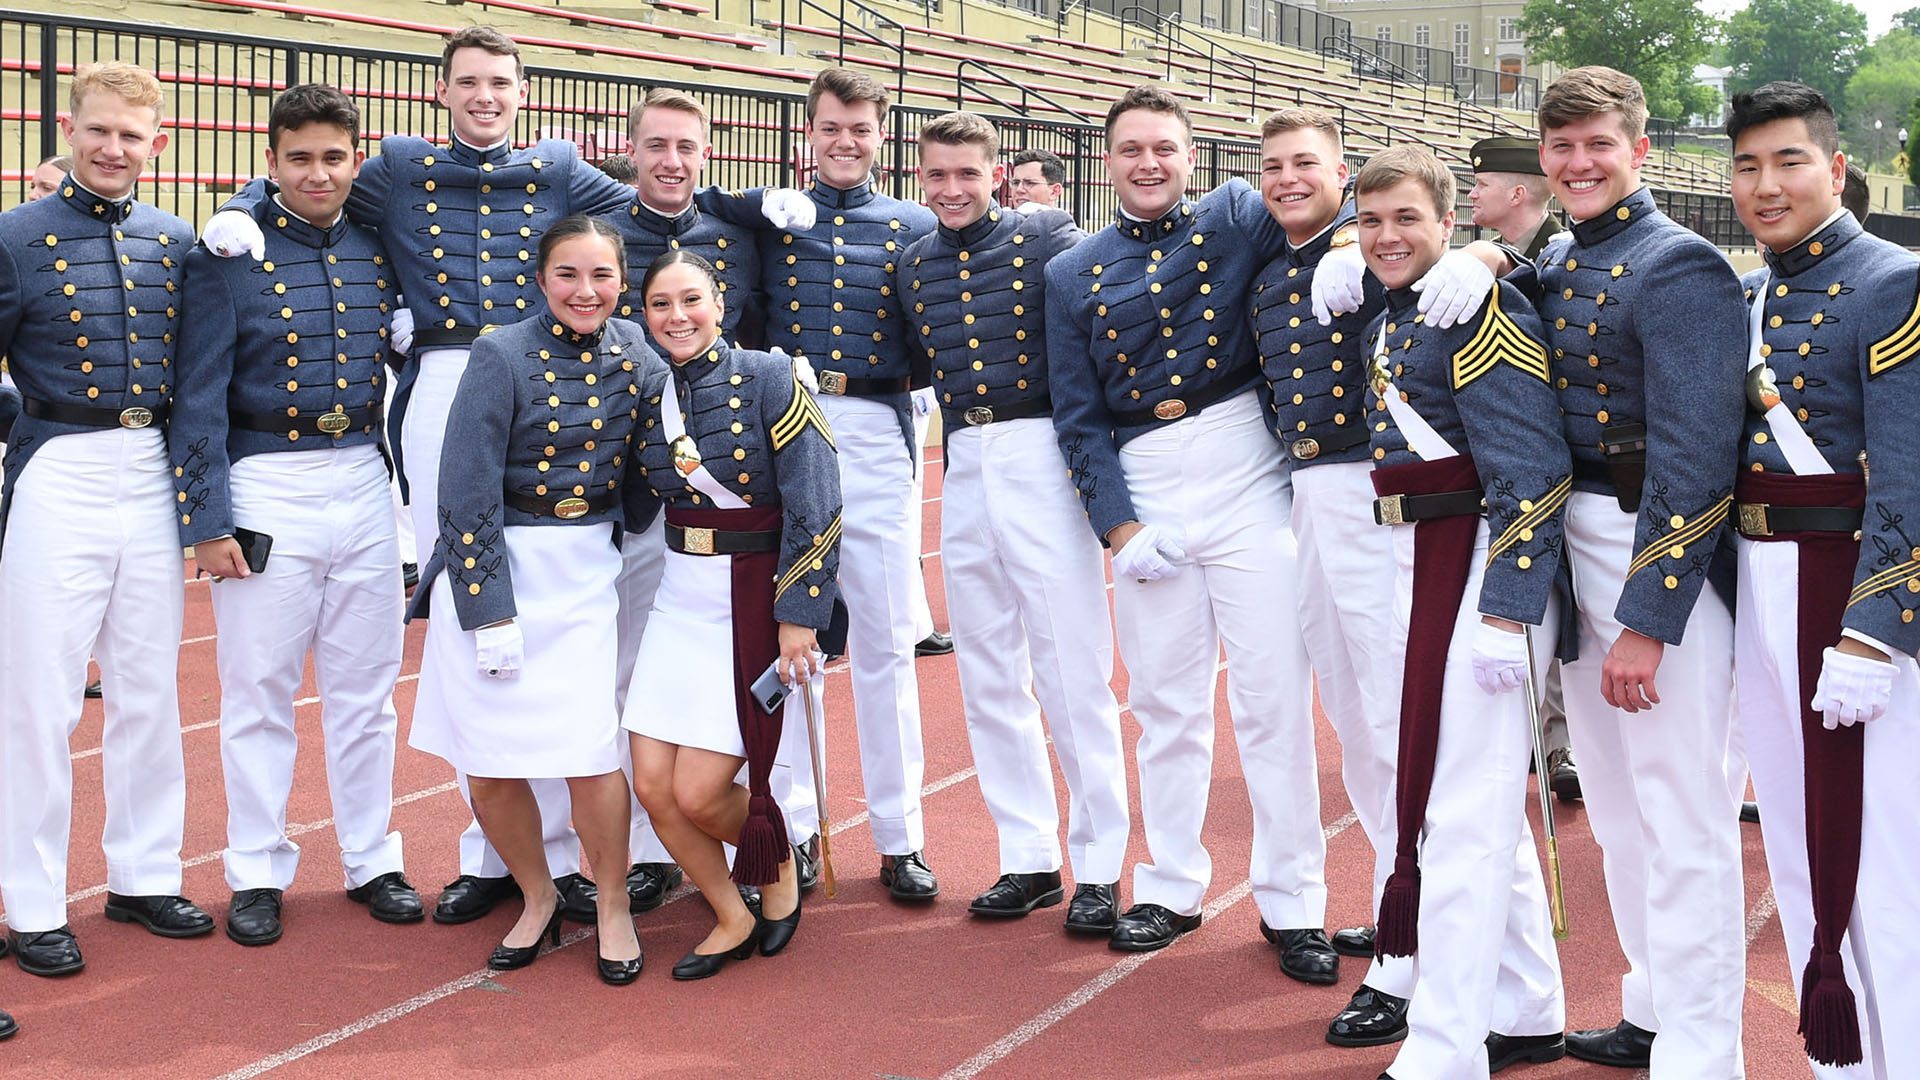 Group of cadets smiling on the football field before graduation